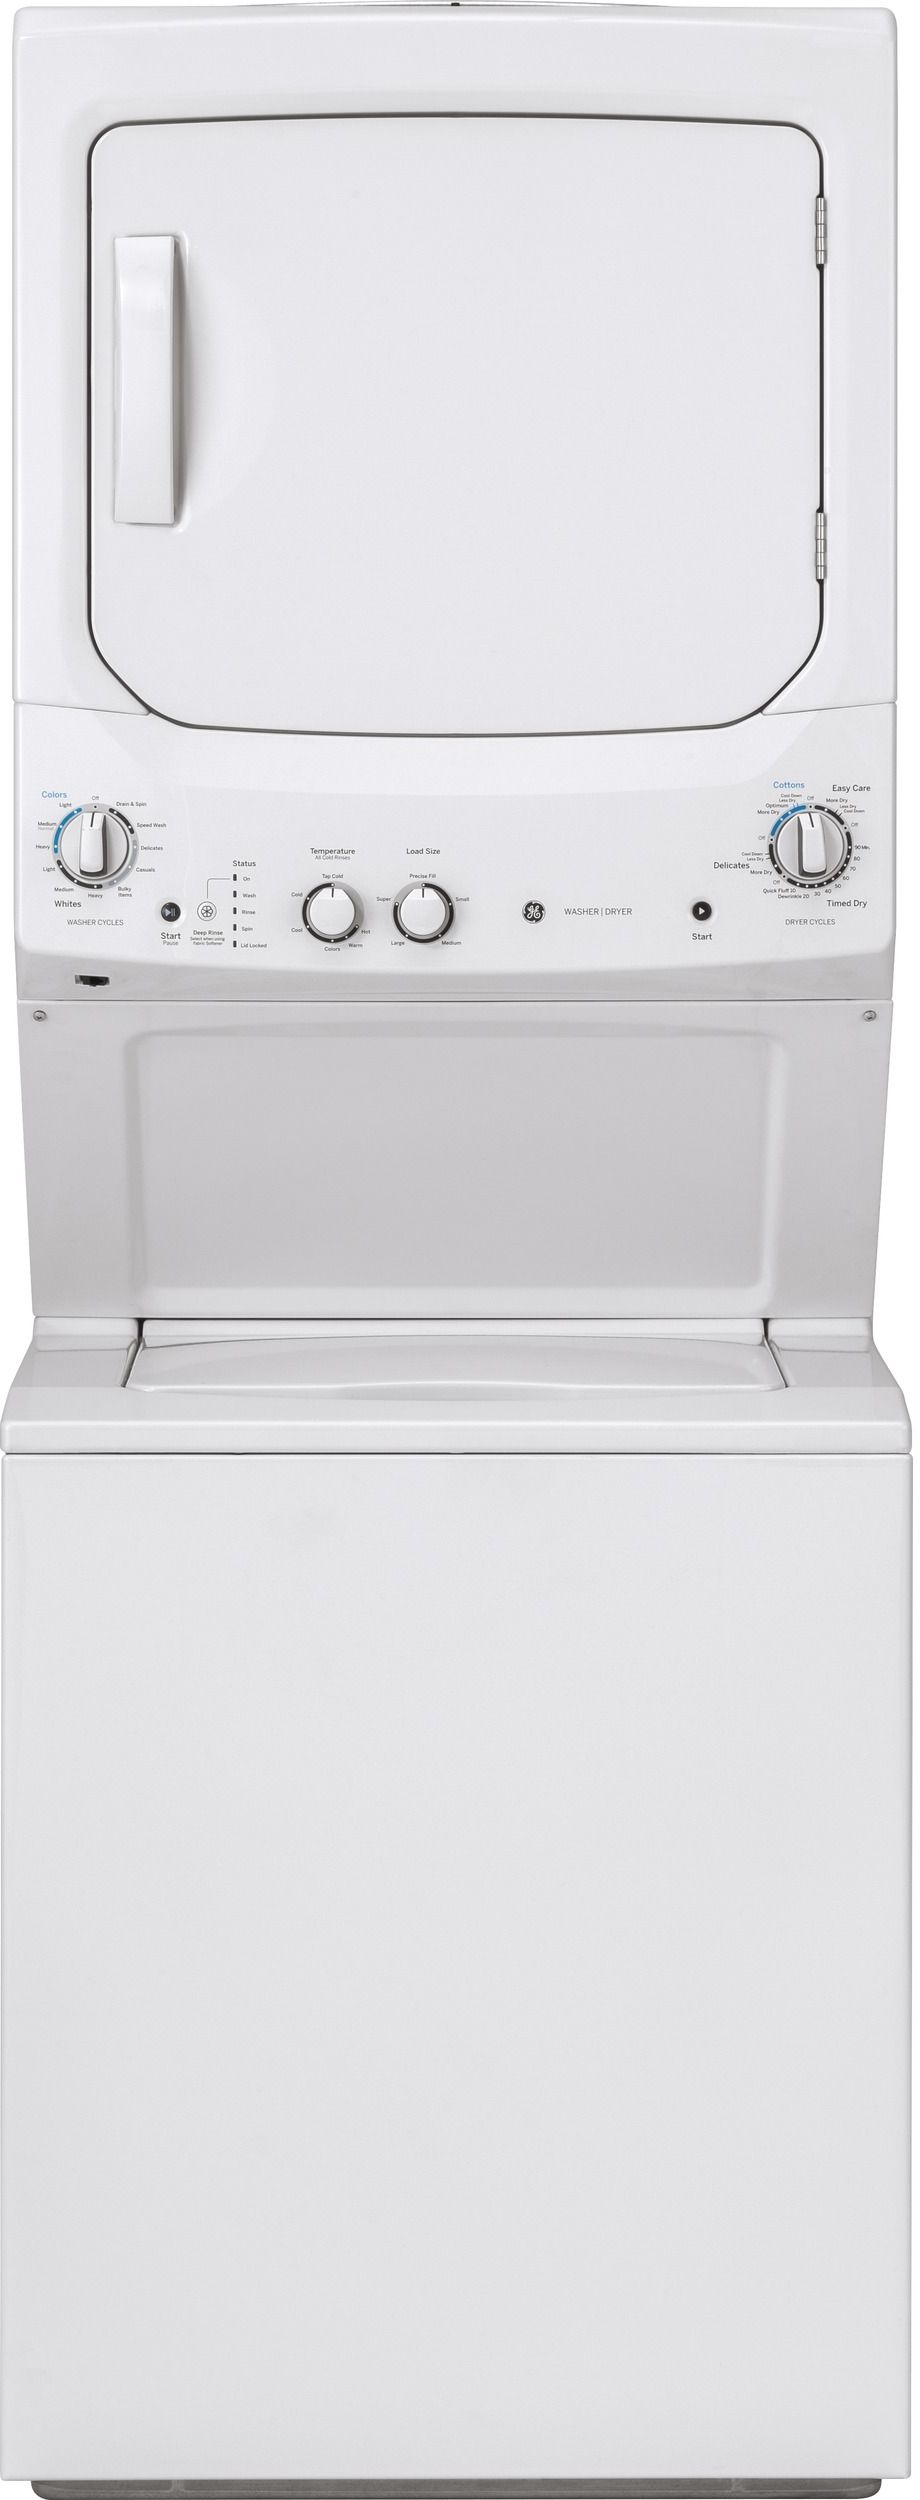 GE® Unitized Spacemaker® 3.8 Cu. Ft. Washer, 5.9 Cu. Ft. White On White Gas Dryer-GUD27GSSMWW